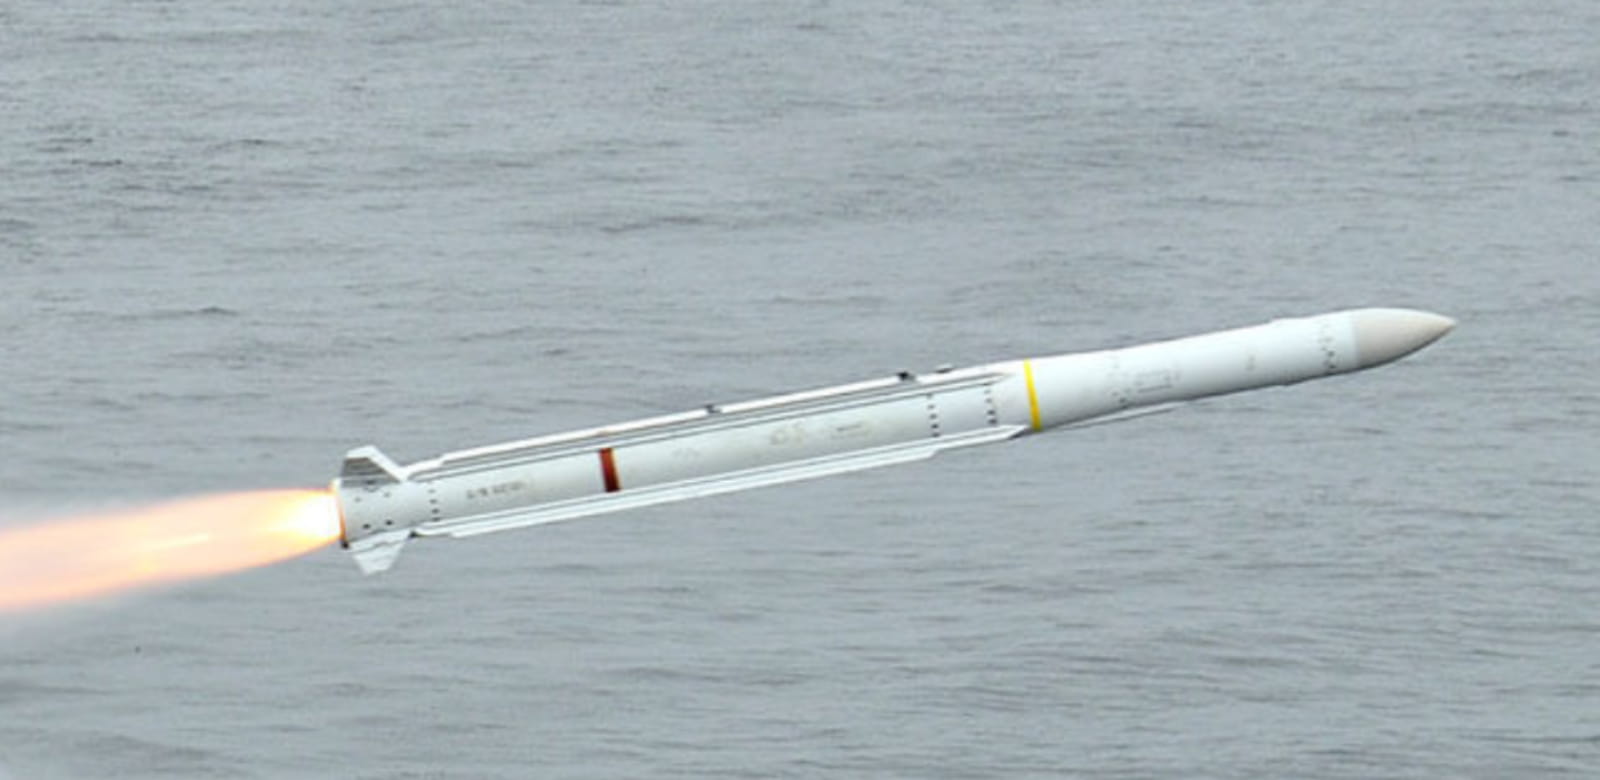 A Raytheon Sea Sparrow missile is seen flying over gray waters. The white missile is propelled by its engine, jutting out white-to-red-hot flames on its back.